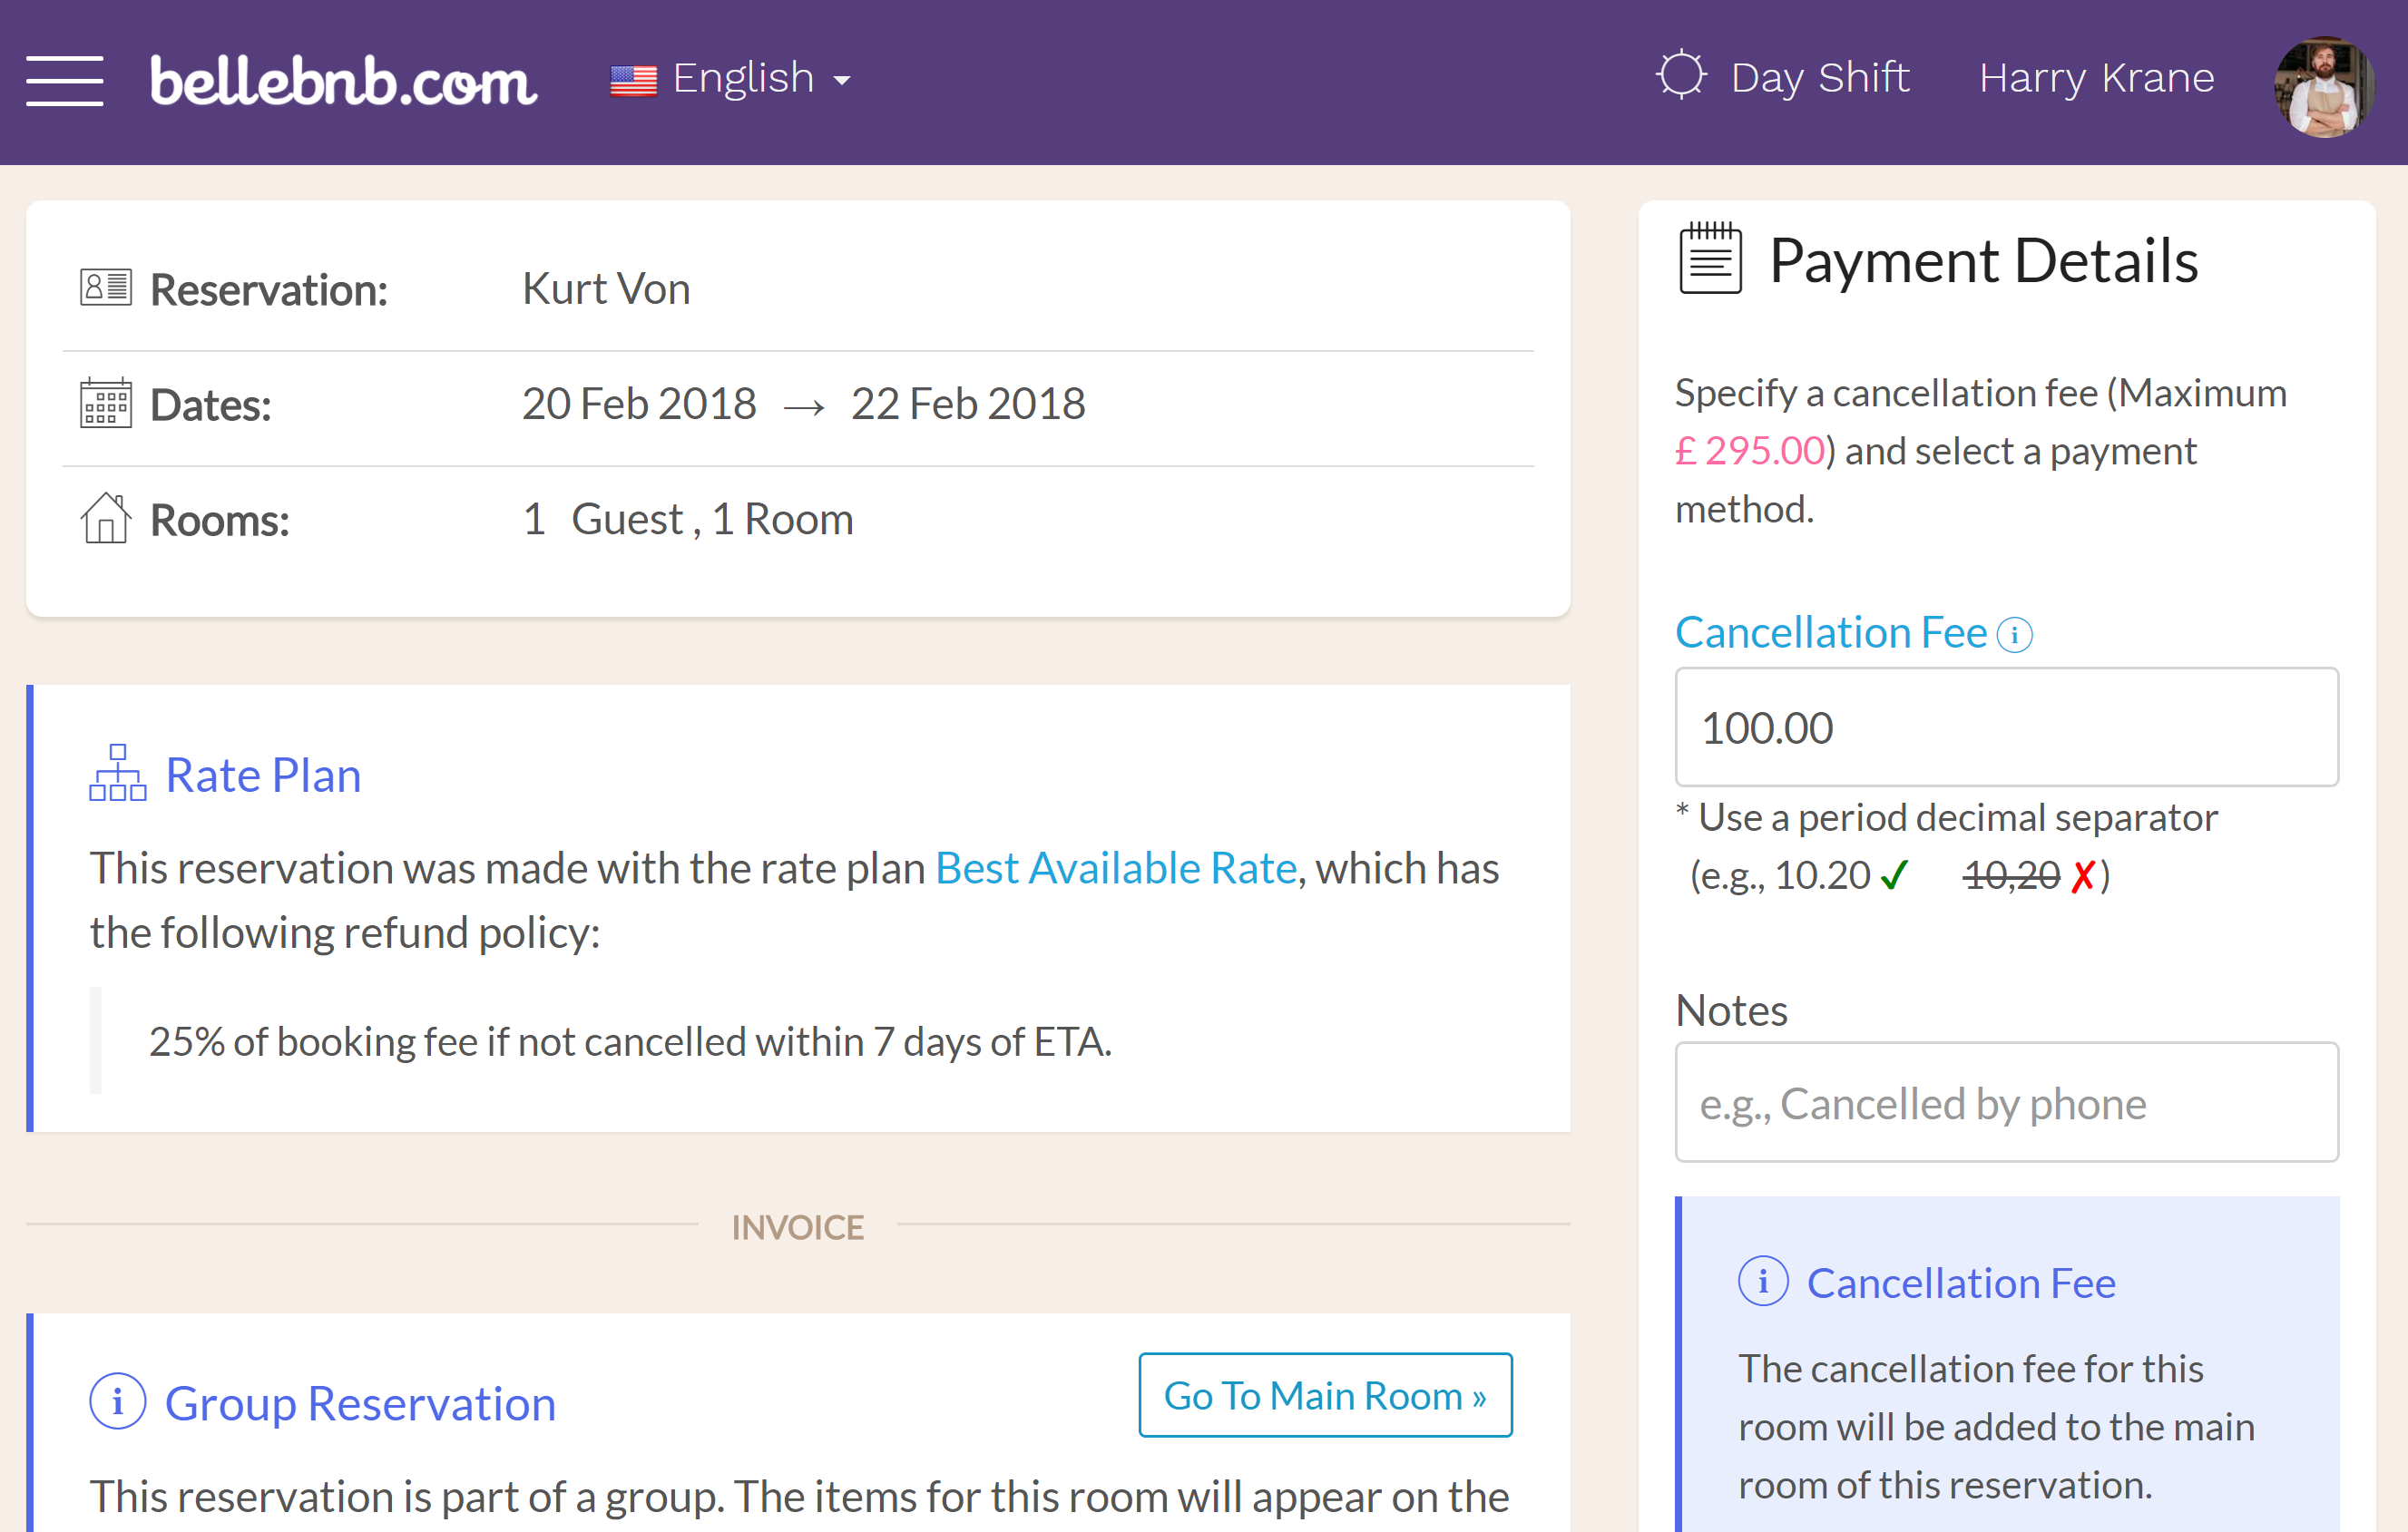 Cancel a Room in a Group To cancel a room in a group, select the booking in your calendar, then go to ‘Actions > Cancel this Room.’ Enter a cancellation fee, if any, then click to cancel. The cancellation fee for this room will appear on the invoice of the main room for the group.